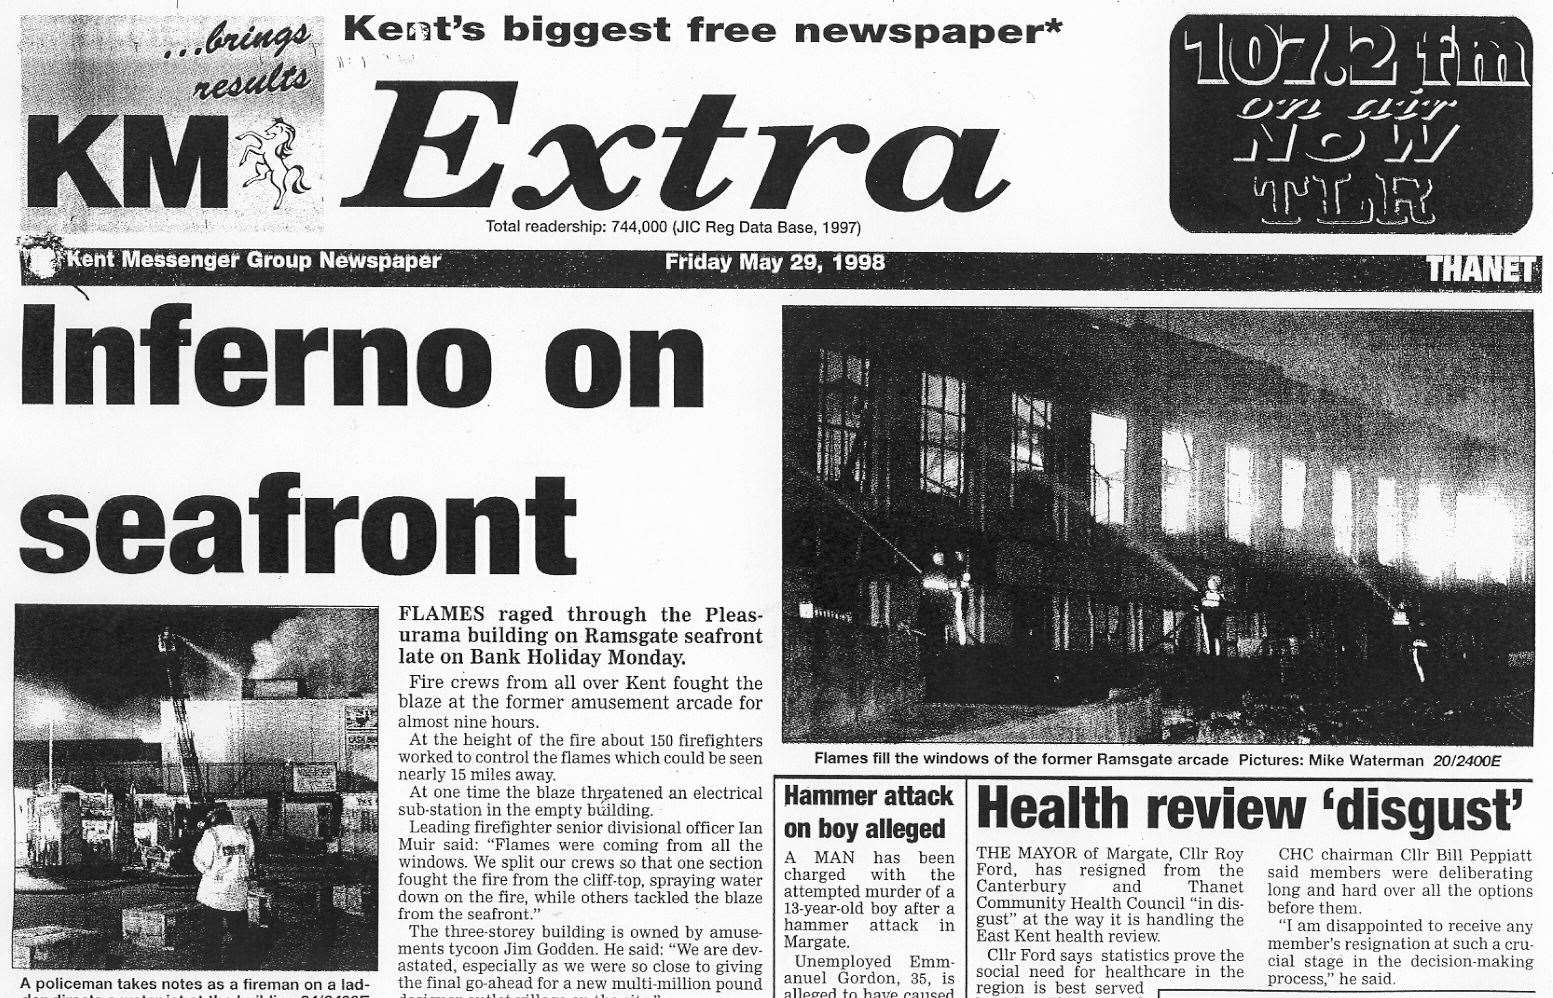 How news of the Pleasurama site blaze was broken in the Thanet Extra in 1998